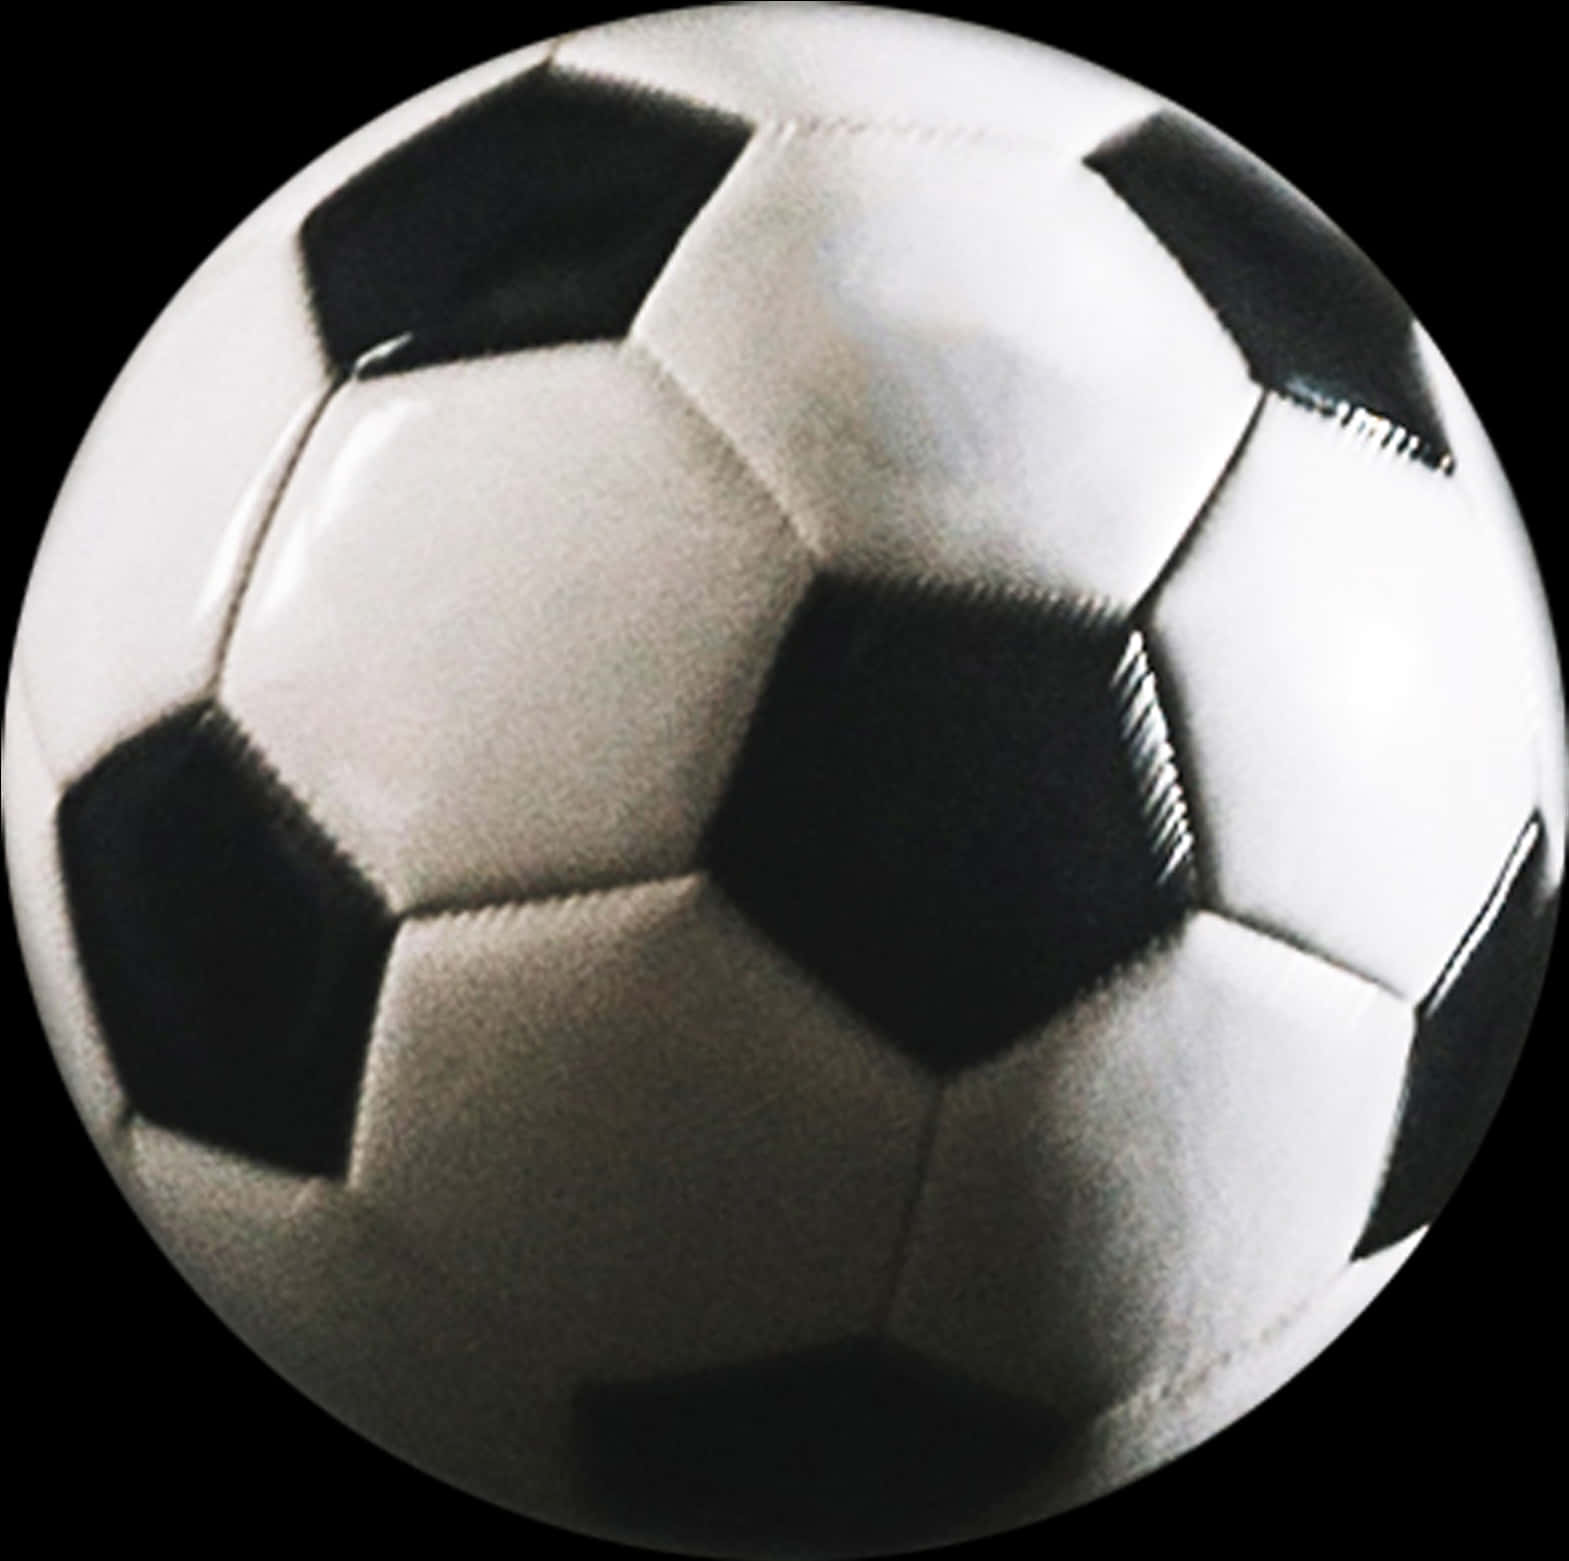 Classic Soccer Ball Image PNG image